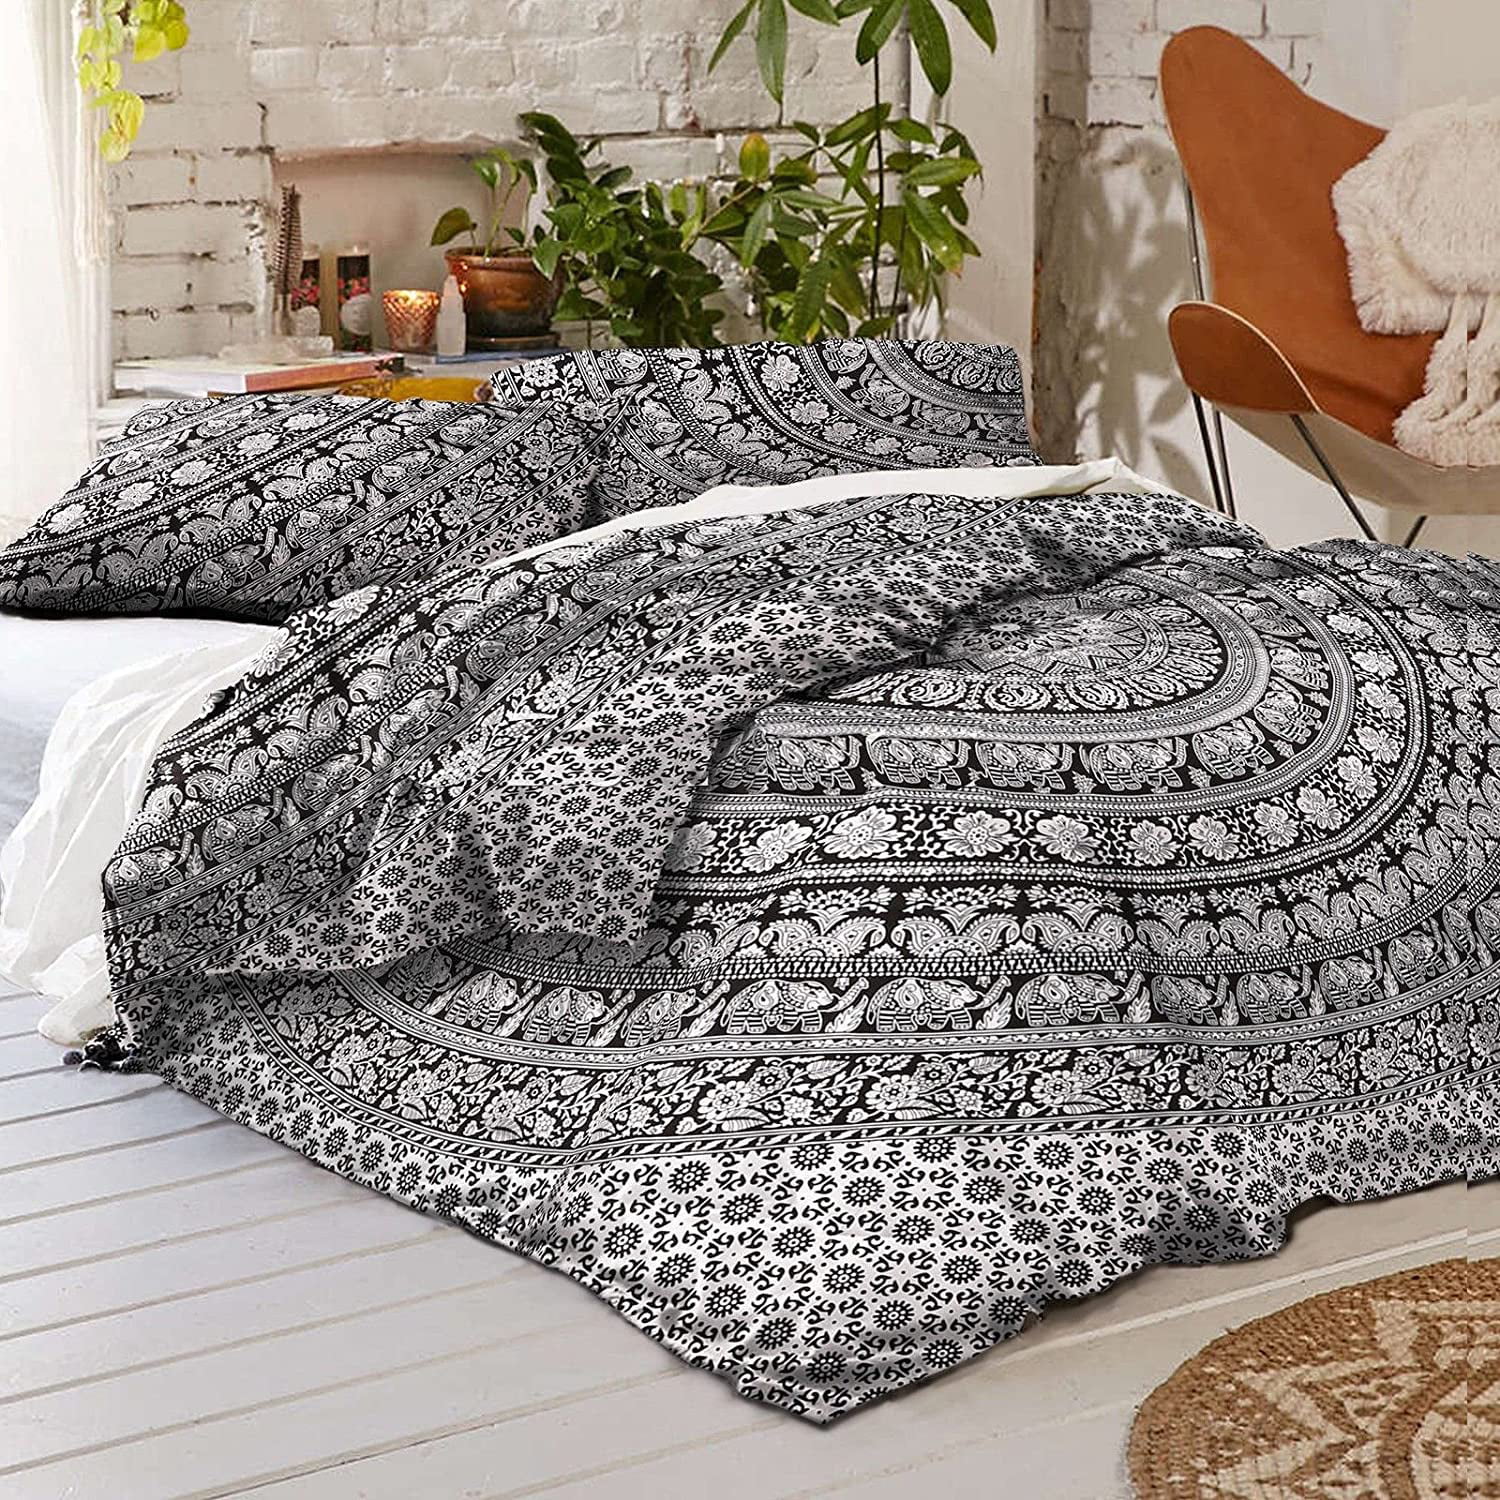 Indian Bohemian Hippie Mandala Bedding Set Queen Size Bedspreads Bed Cover Throw 